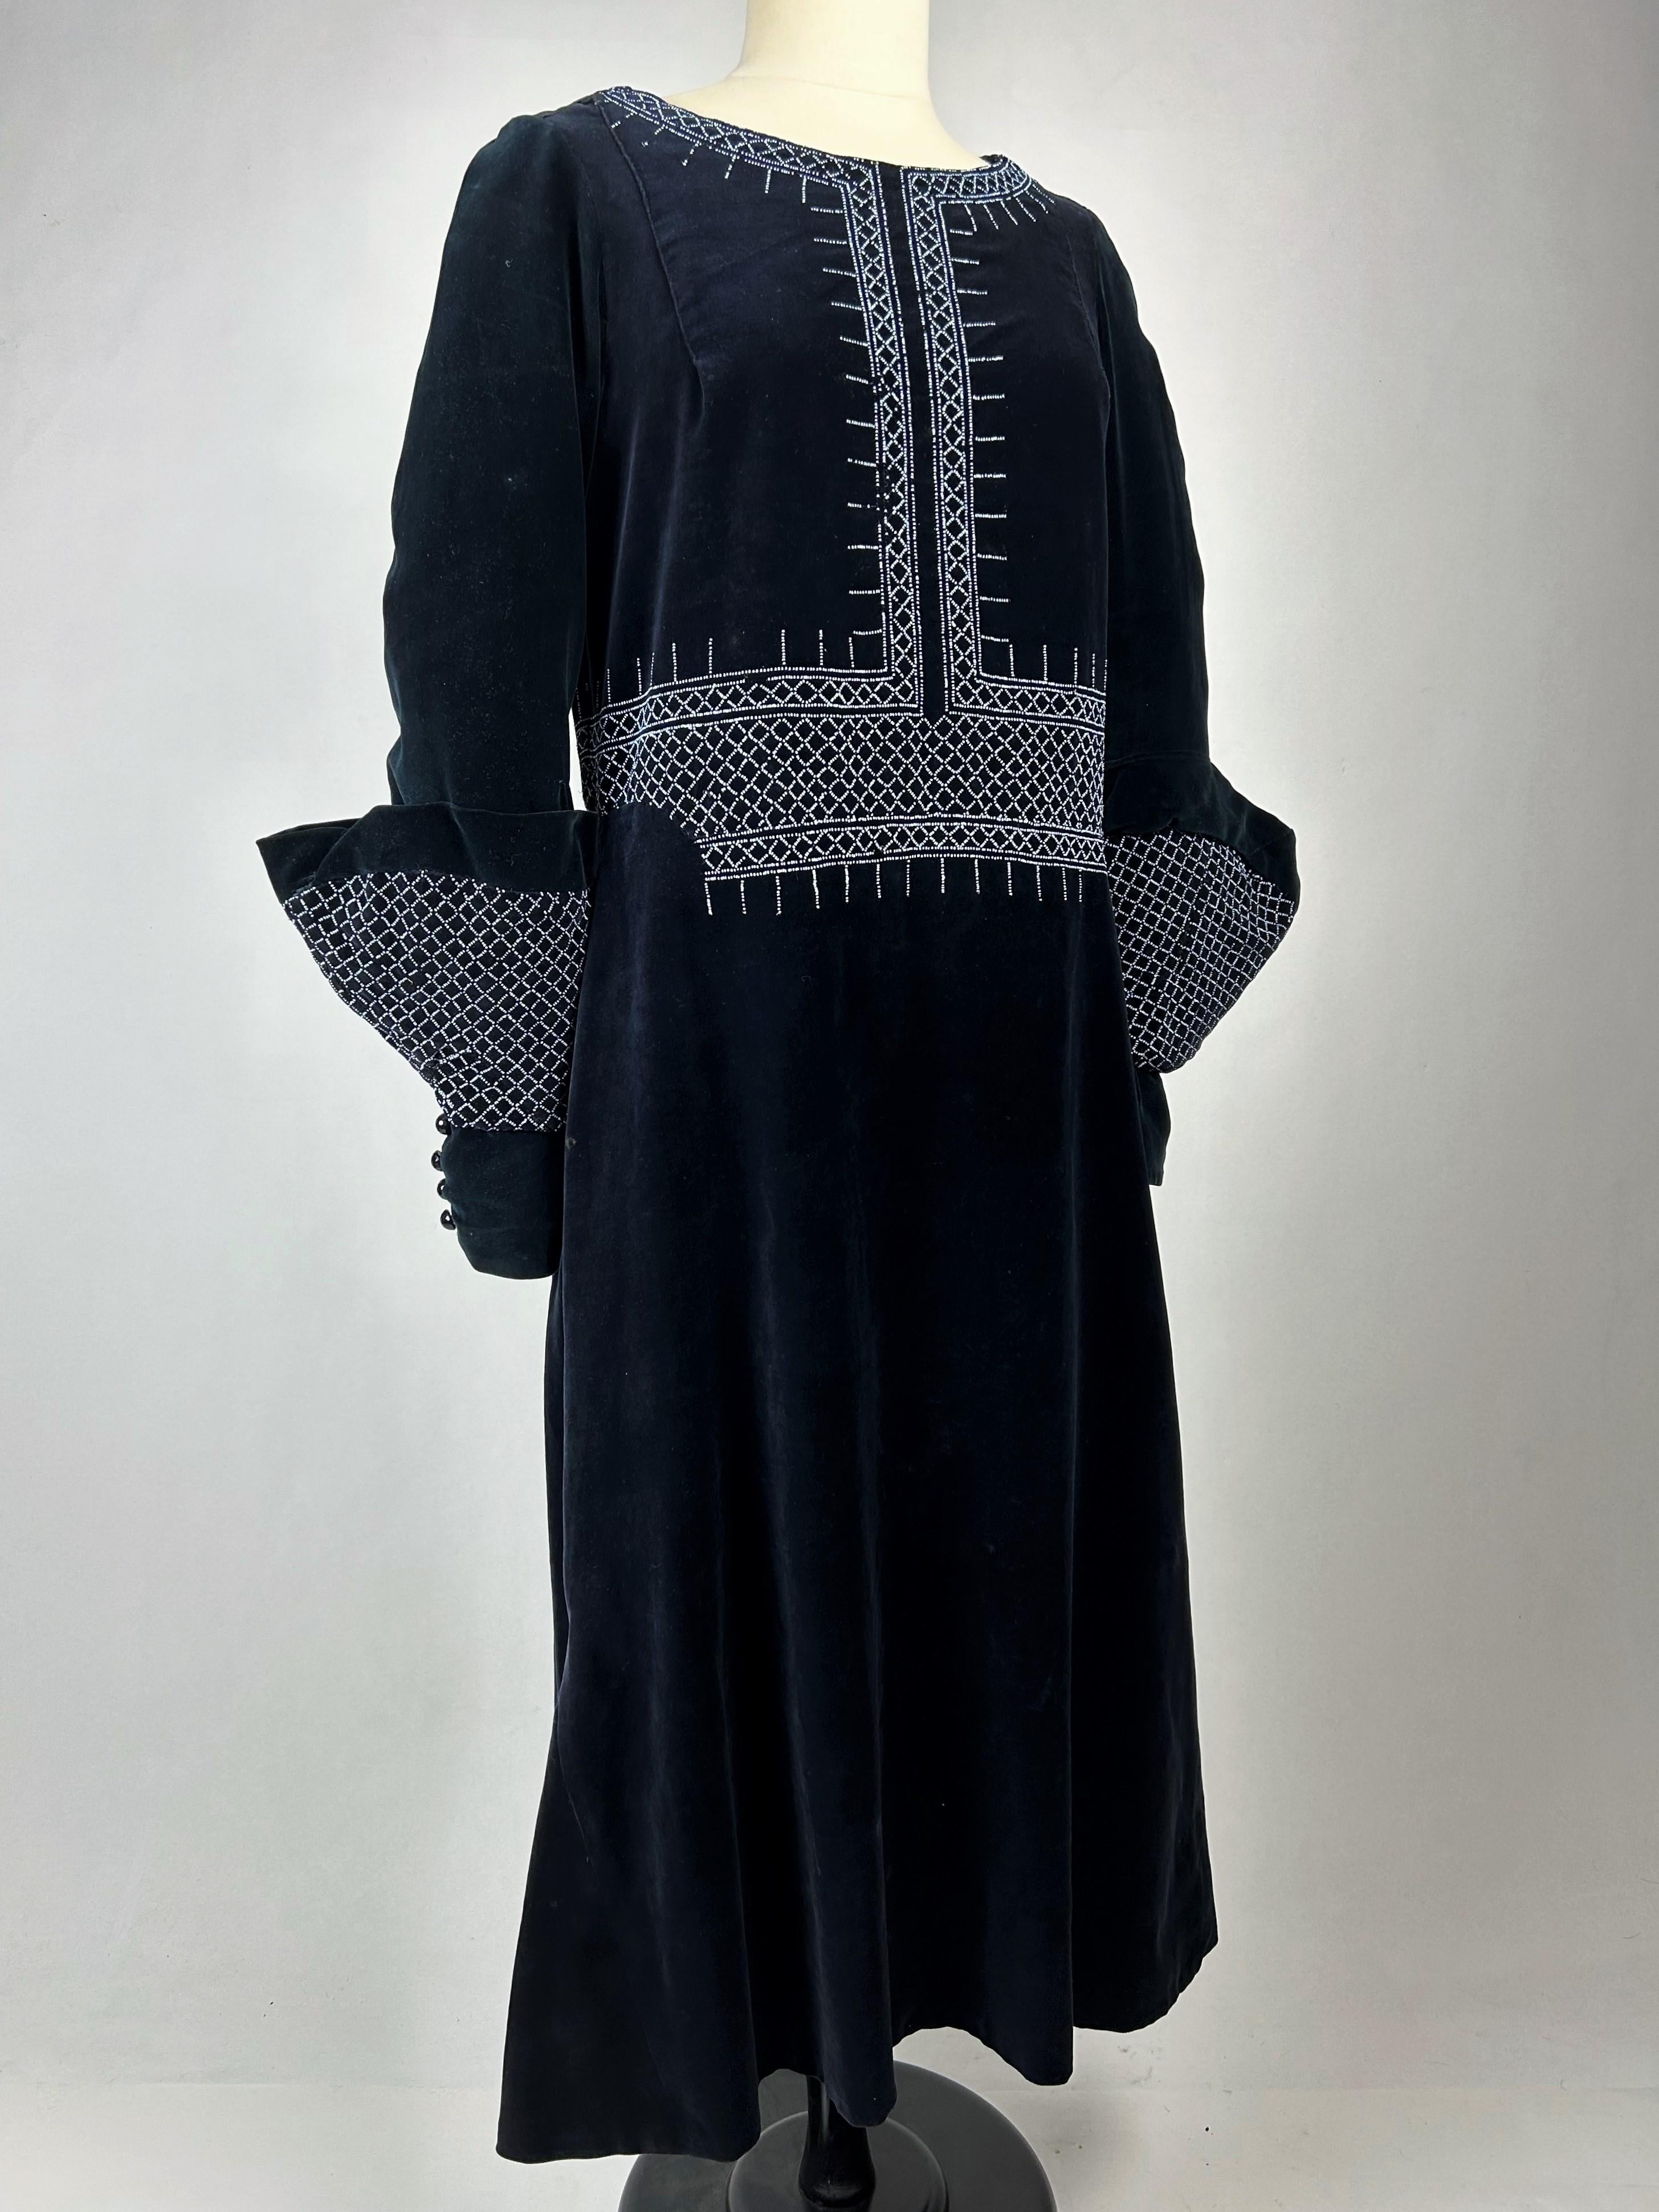 A Navy Velvet Sac Dress with glass beads embroideries - France Circa 1925-1930 For Sale 4